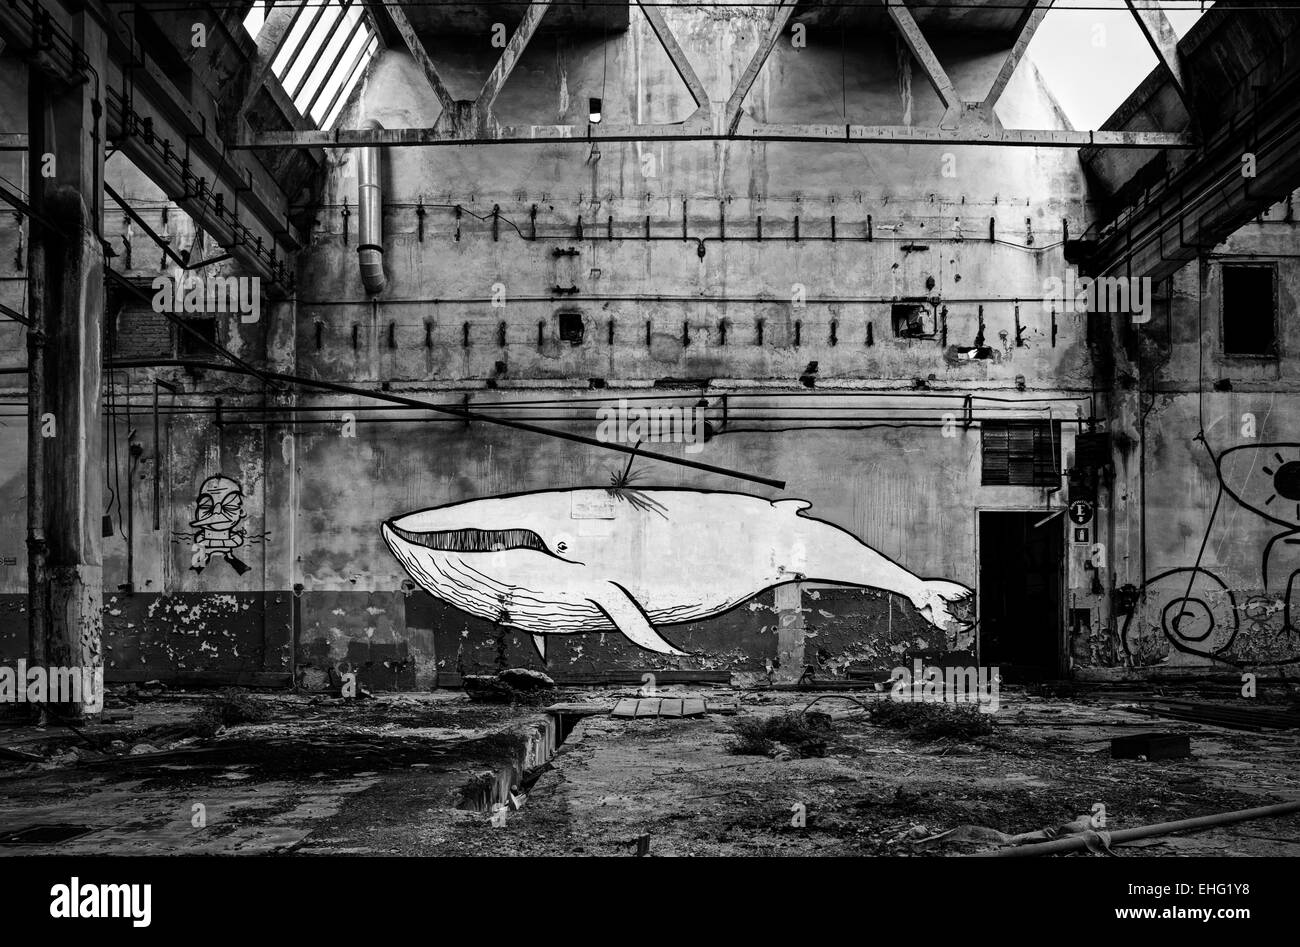 Giant whale mural on abandoned factory wall Stock Photo